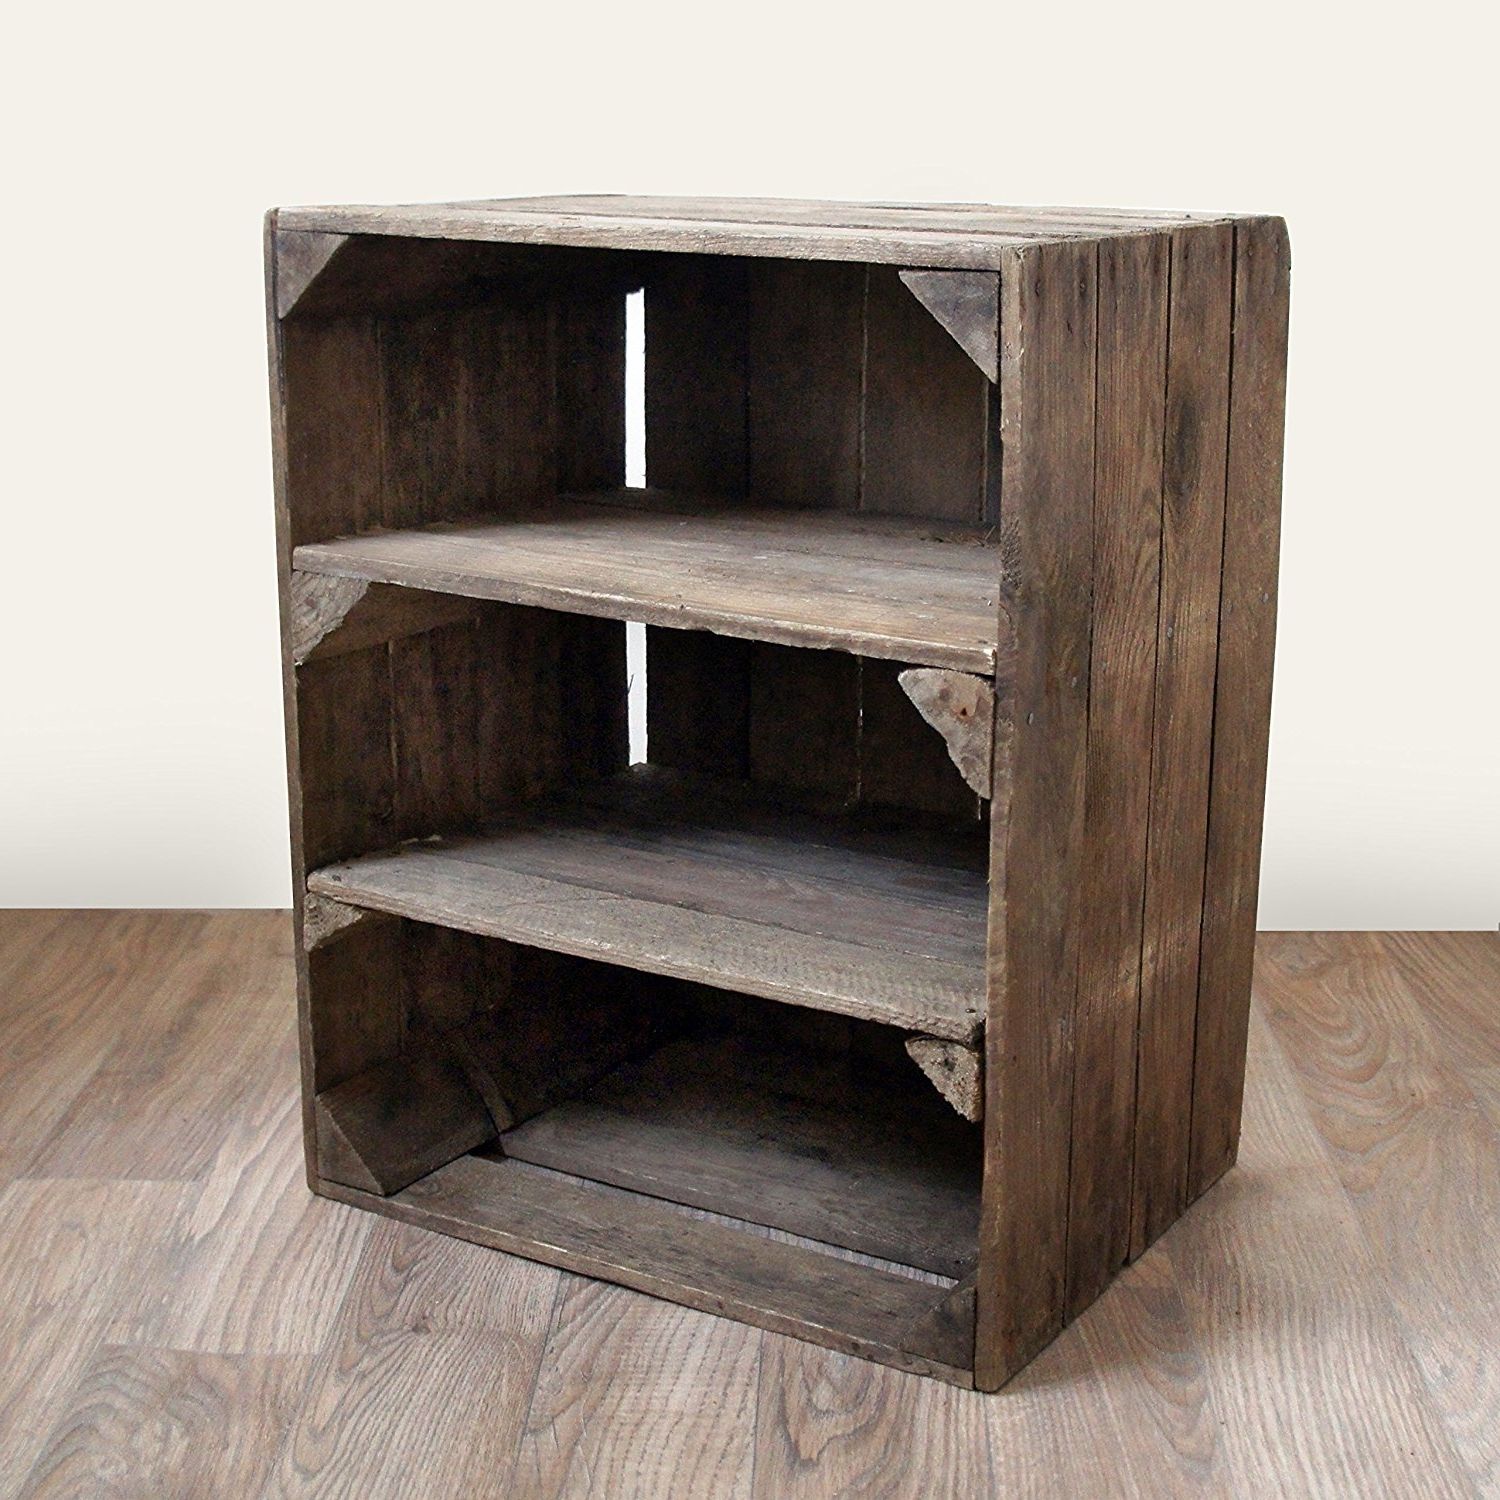 15 Collection of Handmade Wooden Shelves